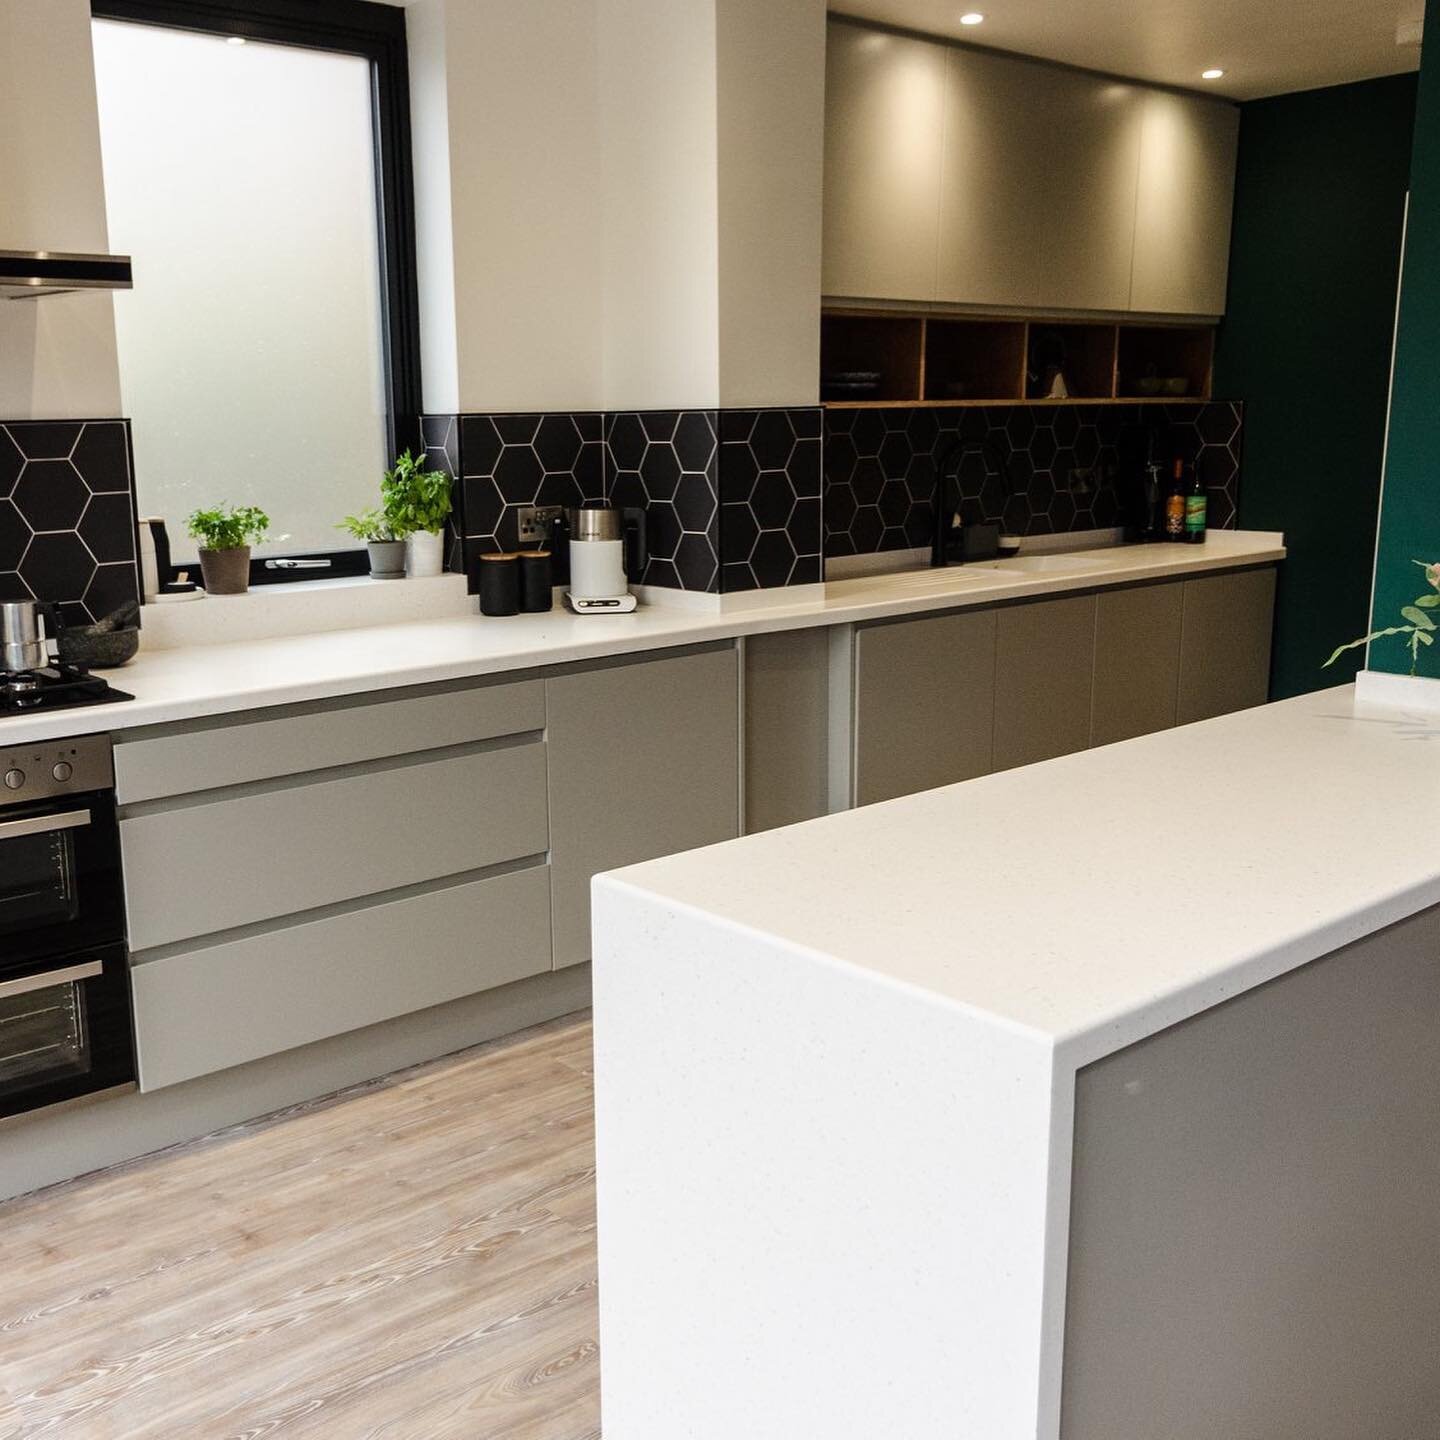 What a beautiful kitchen! 
Our joinery team manufactured and installed this Corian solid surface recently for a client based in Sheffield. 
The project involved working around the unusual shape of the walls to provide a seamless finish to the worktop